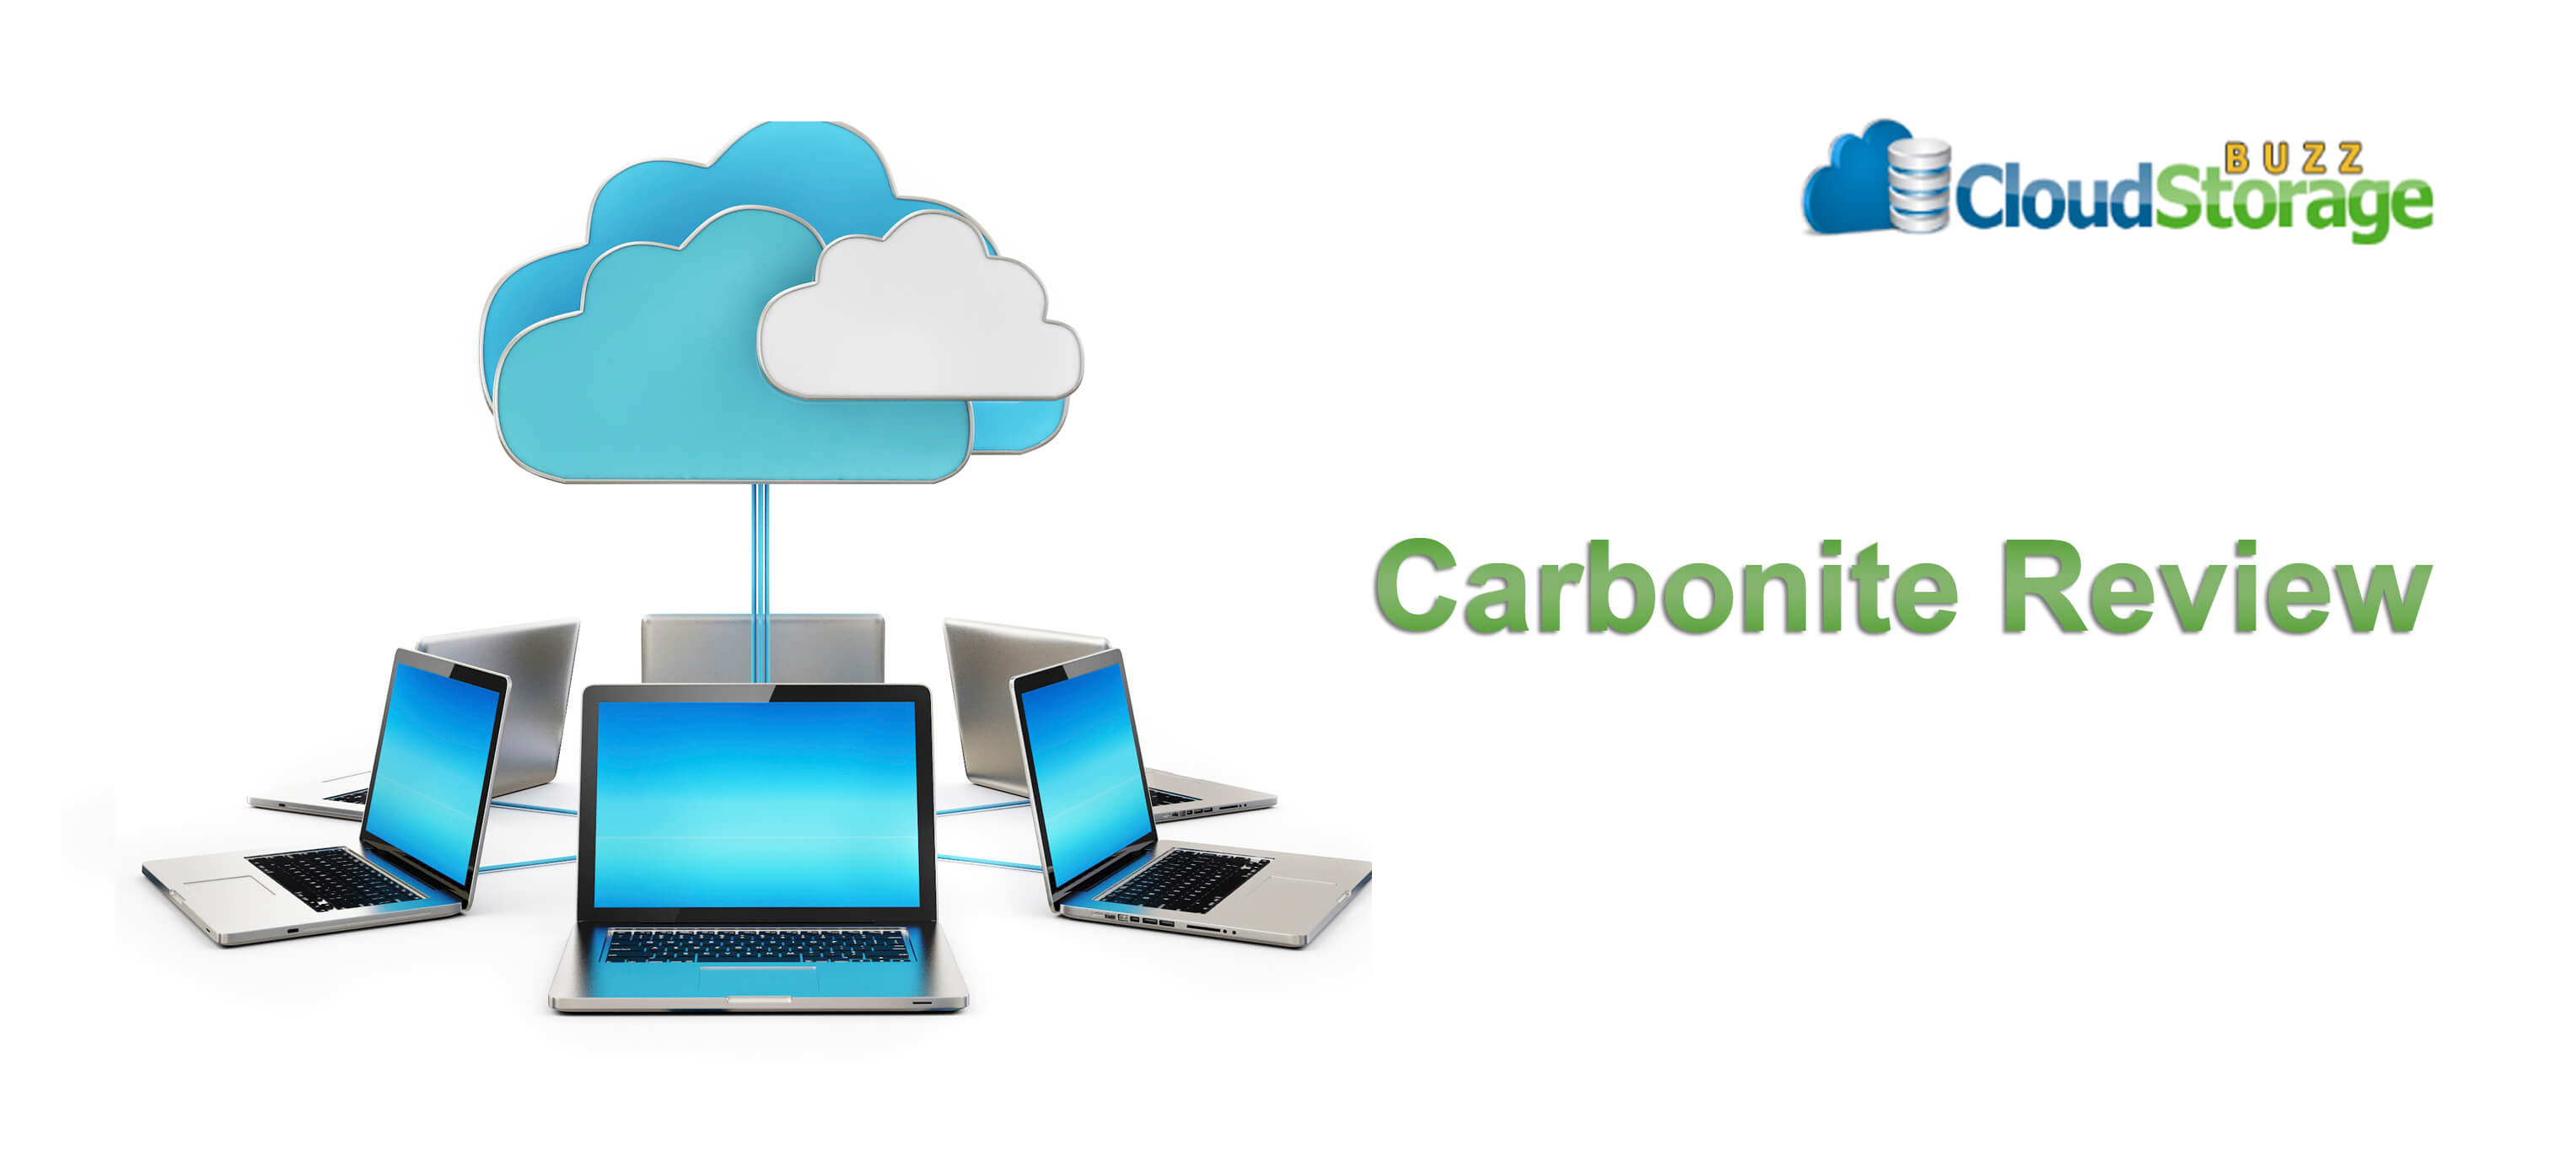 Carbonite Review – How Does It Work And What Makes It Unique?